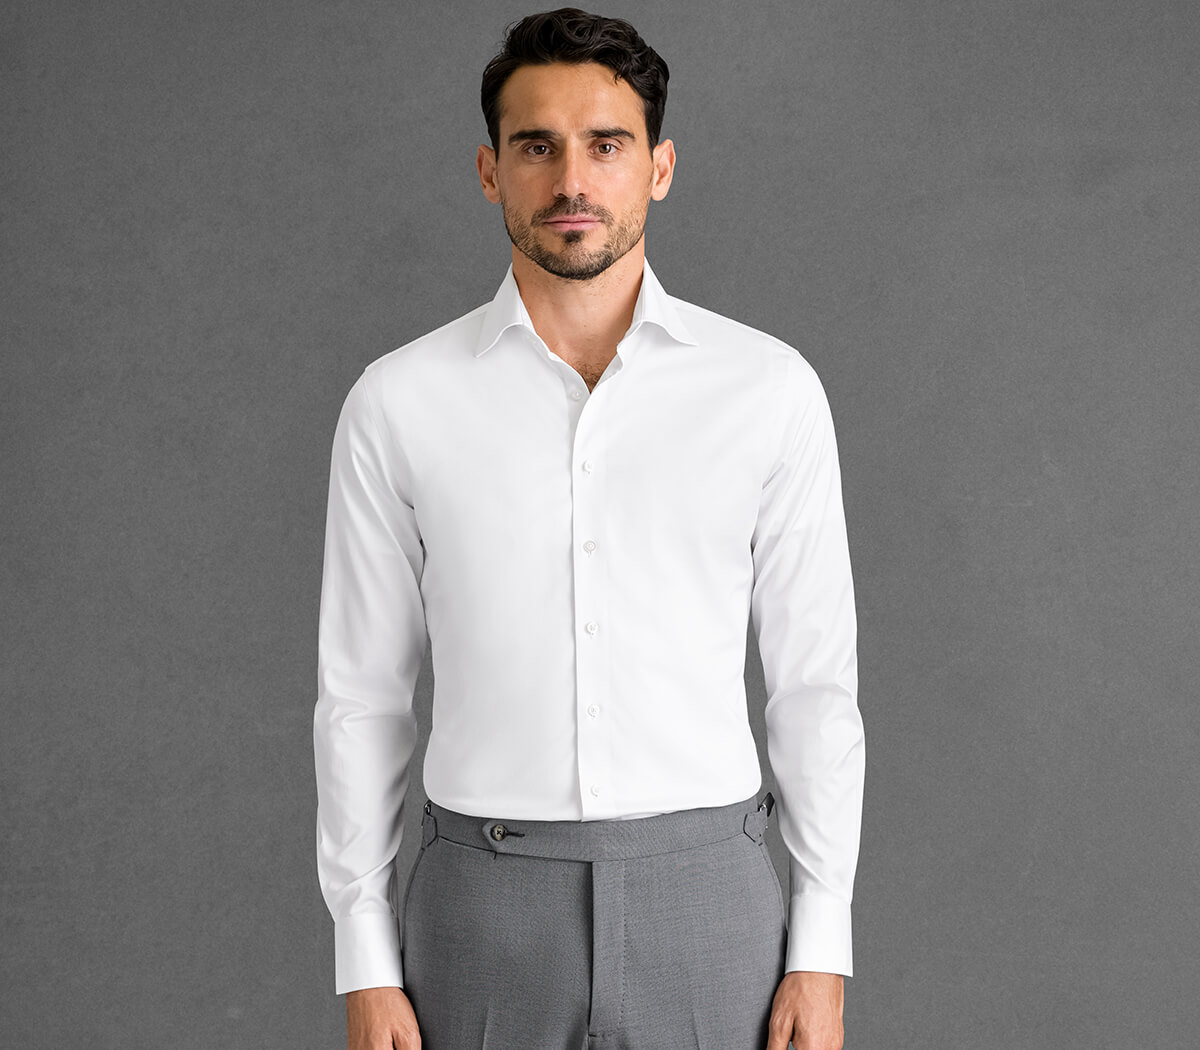 The Business Shirt Guide | Best shirts for the office - Proper Cloth